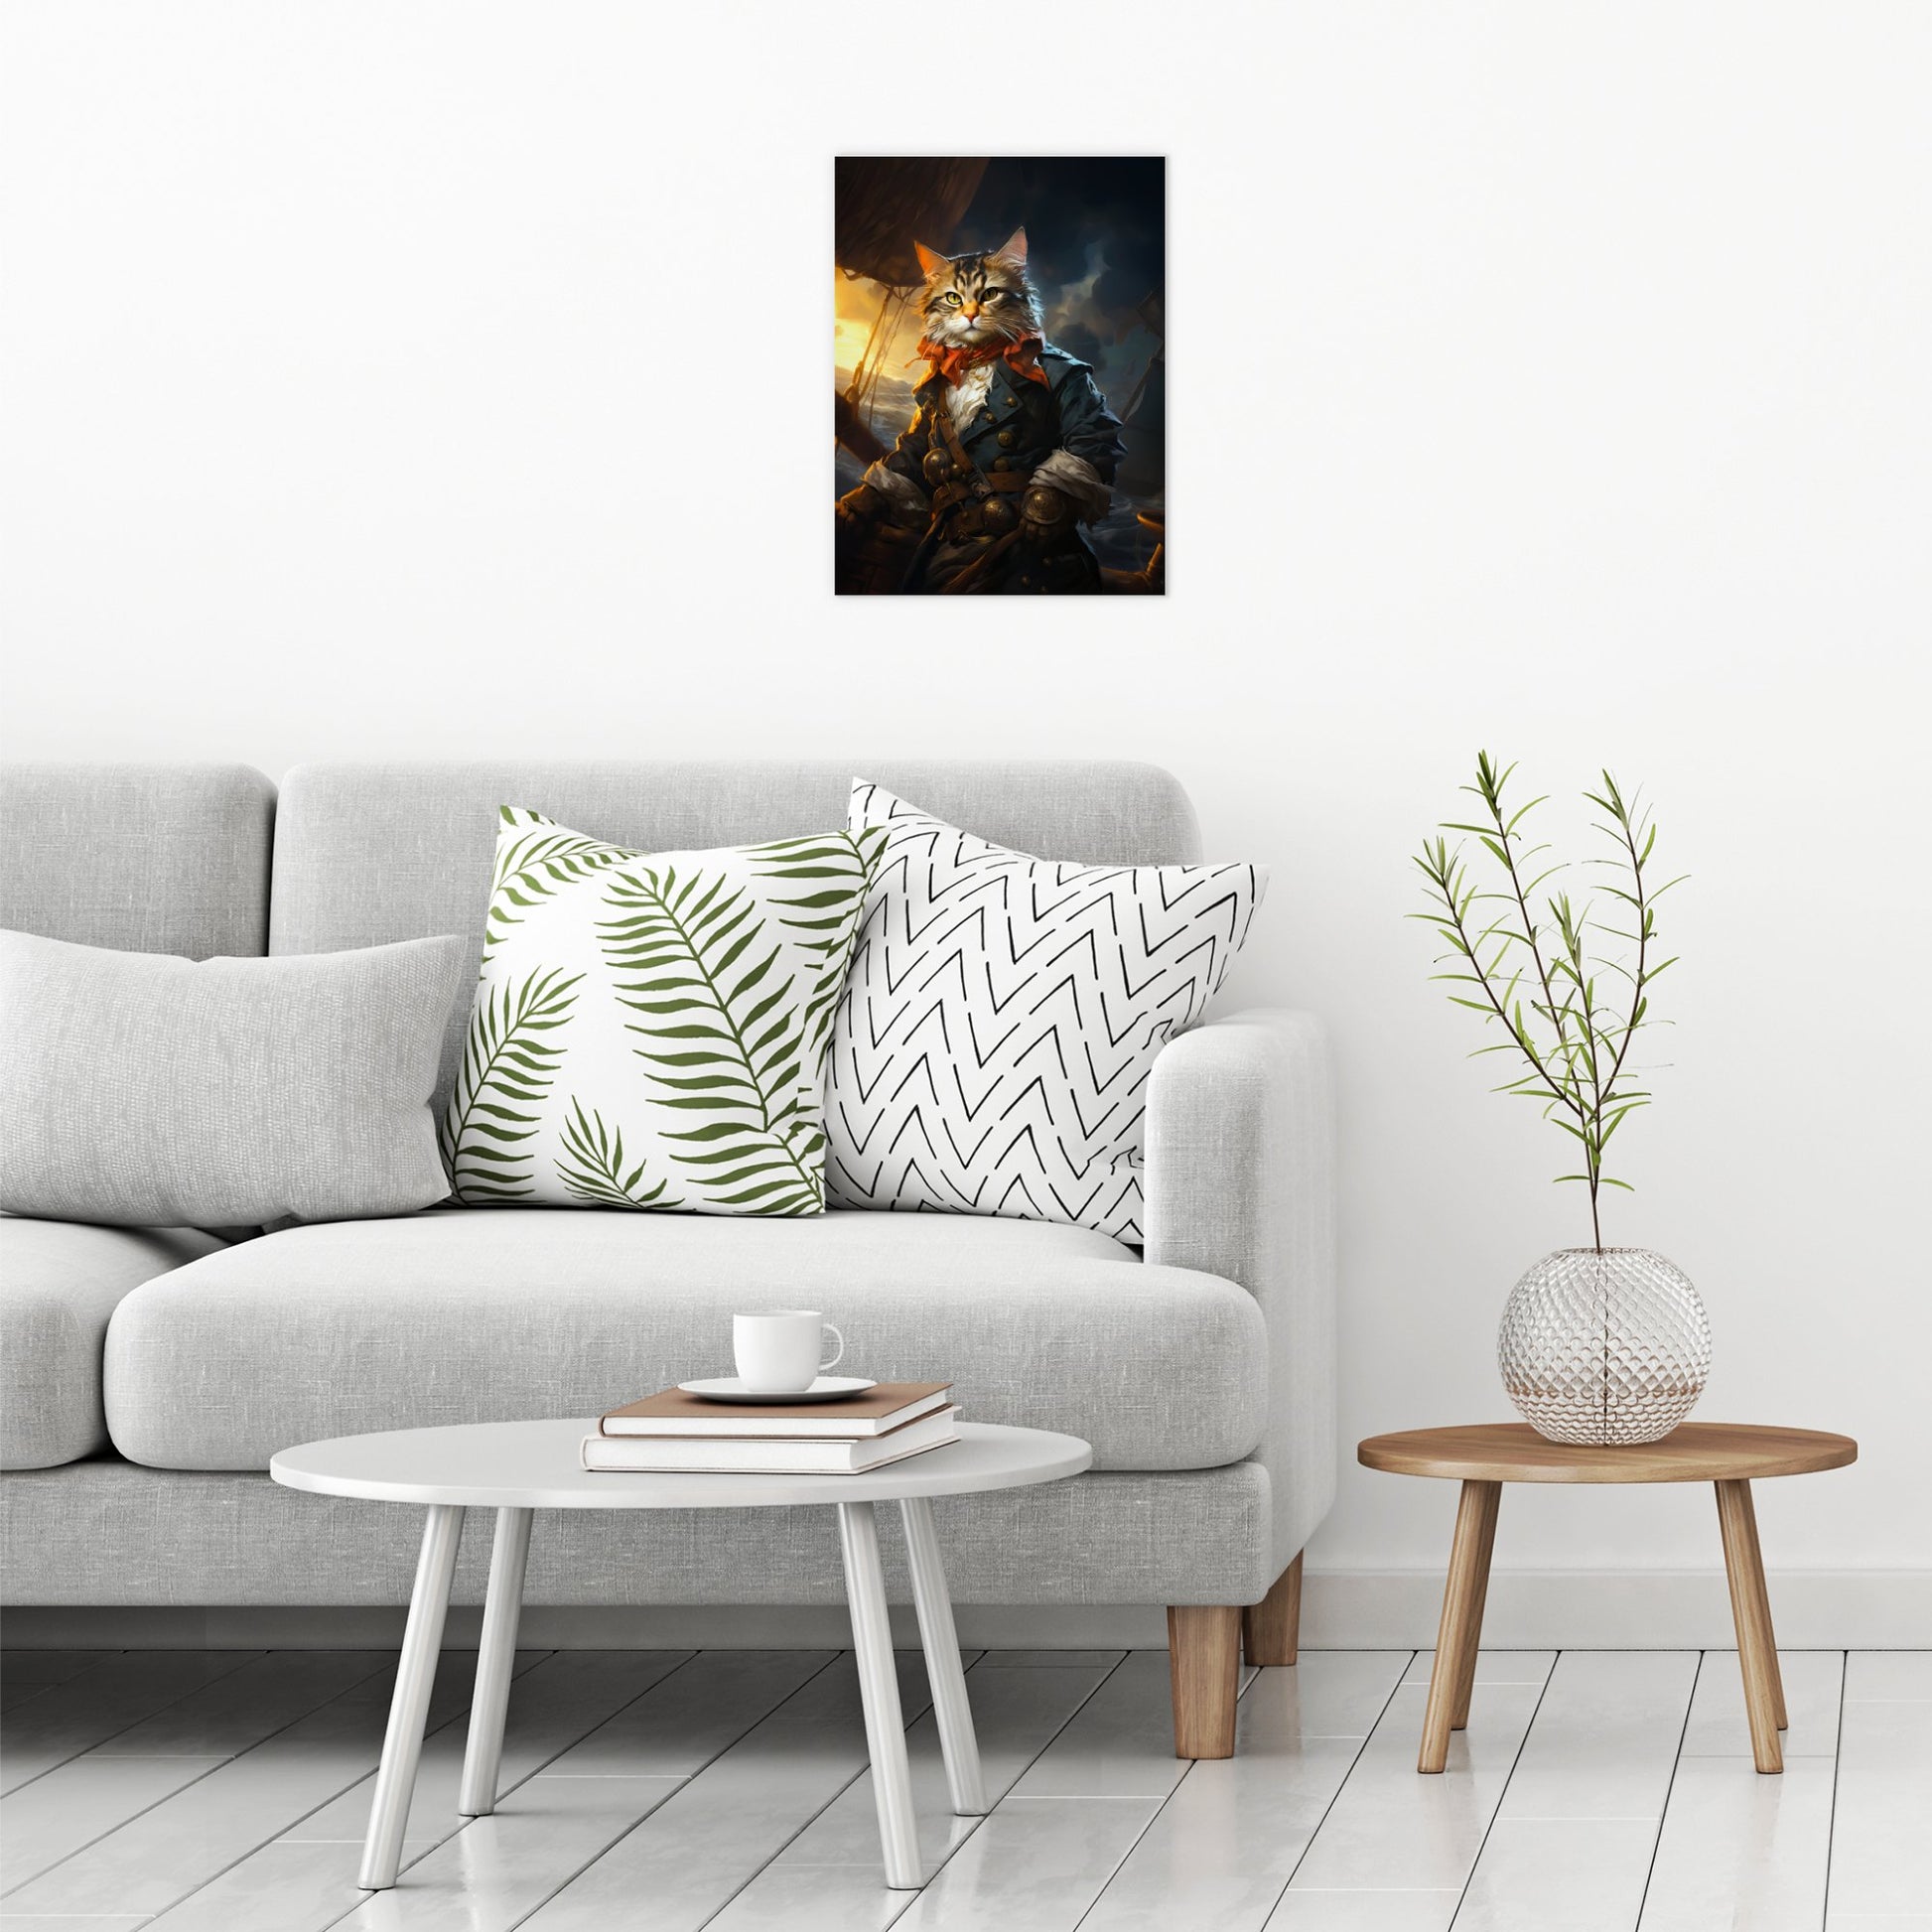 A contemporary modern room view showing a medium size metal art poster display plate with printed design of a Pet Portraits - Pirate Cat Painting